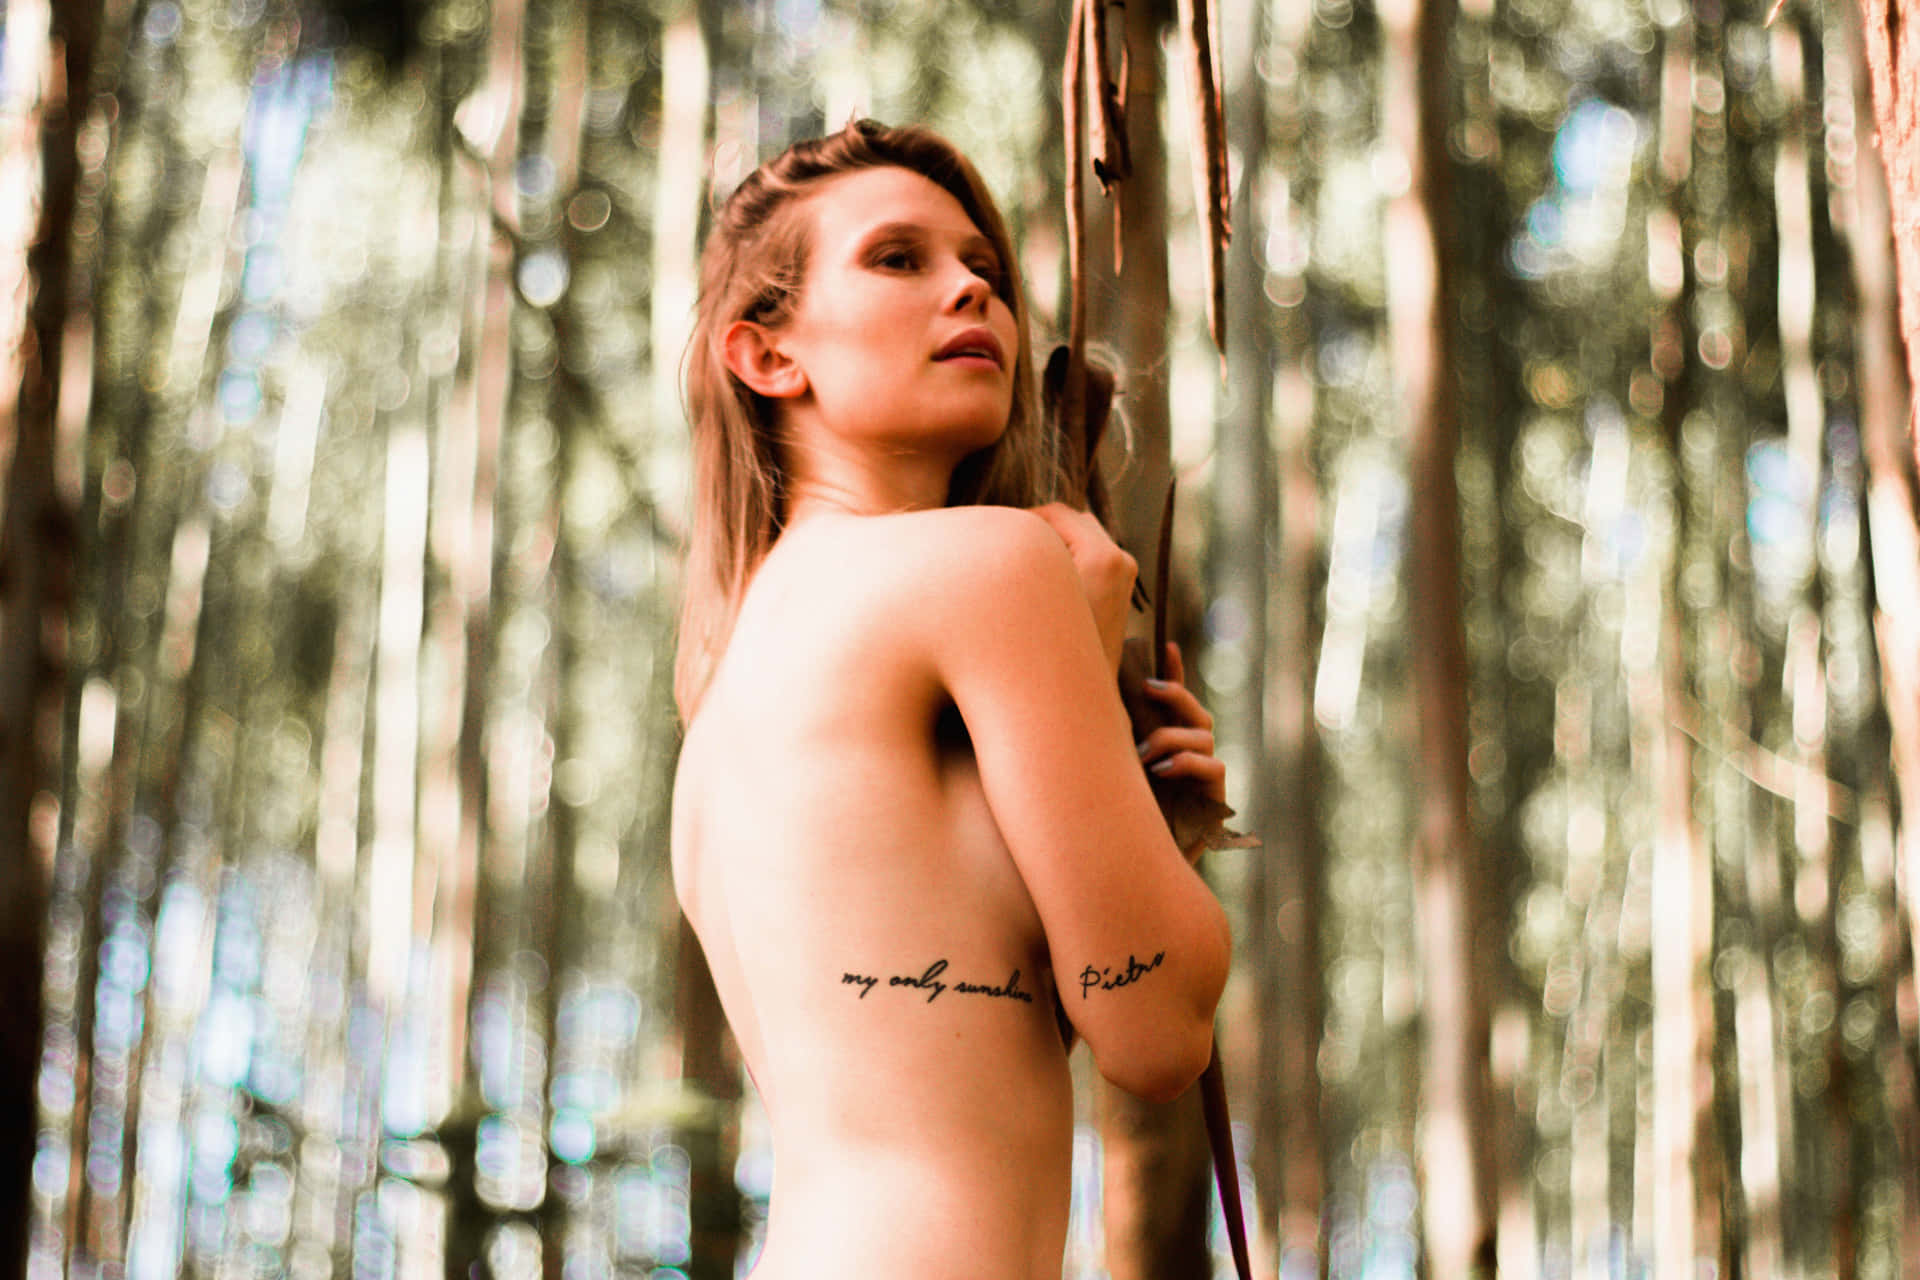 Bare Female Body In The Forest Wallpaper